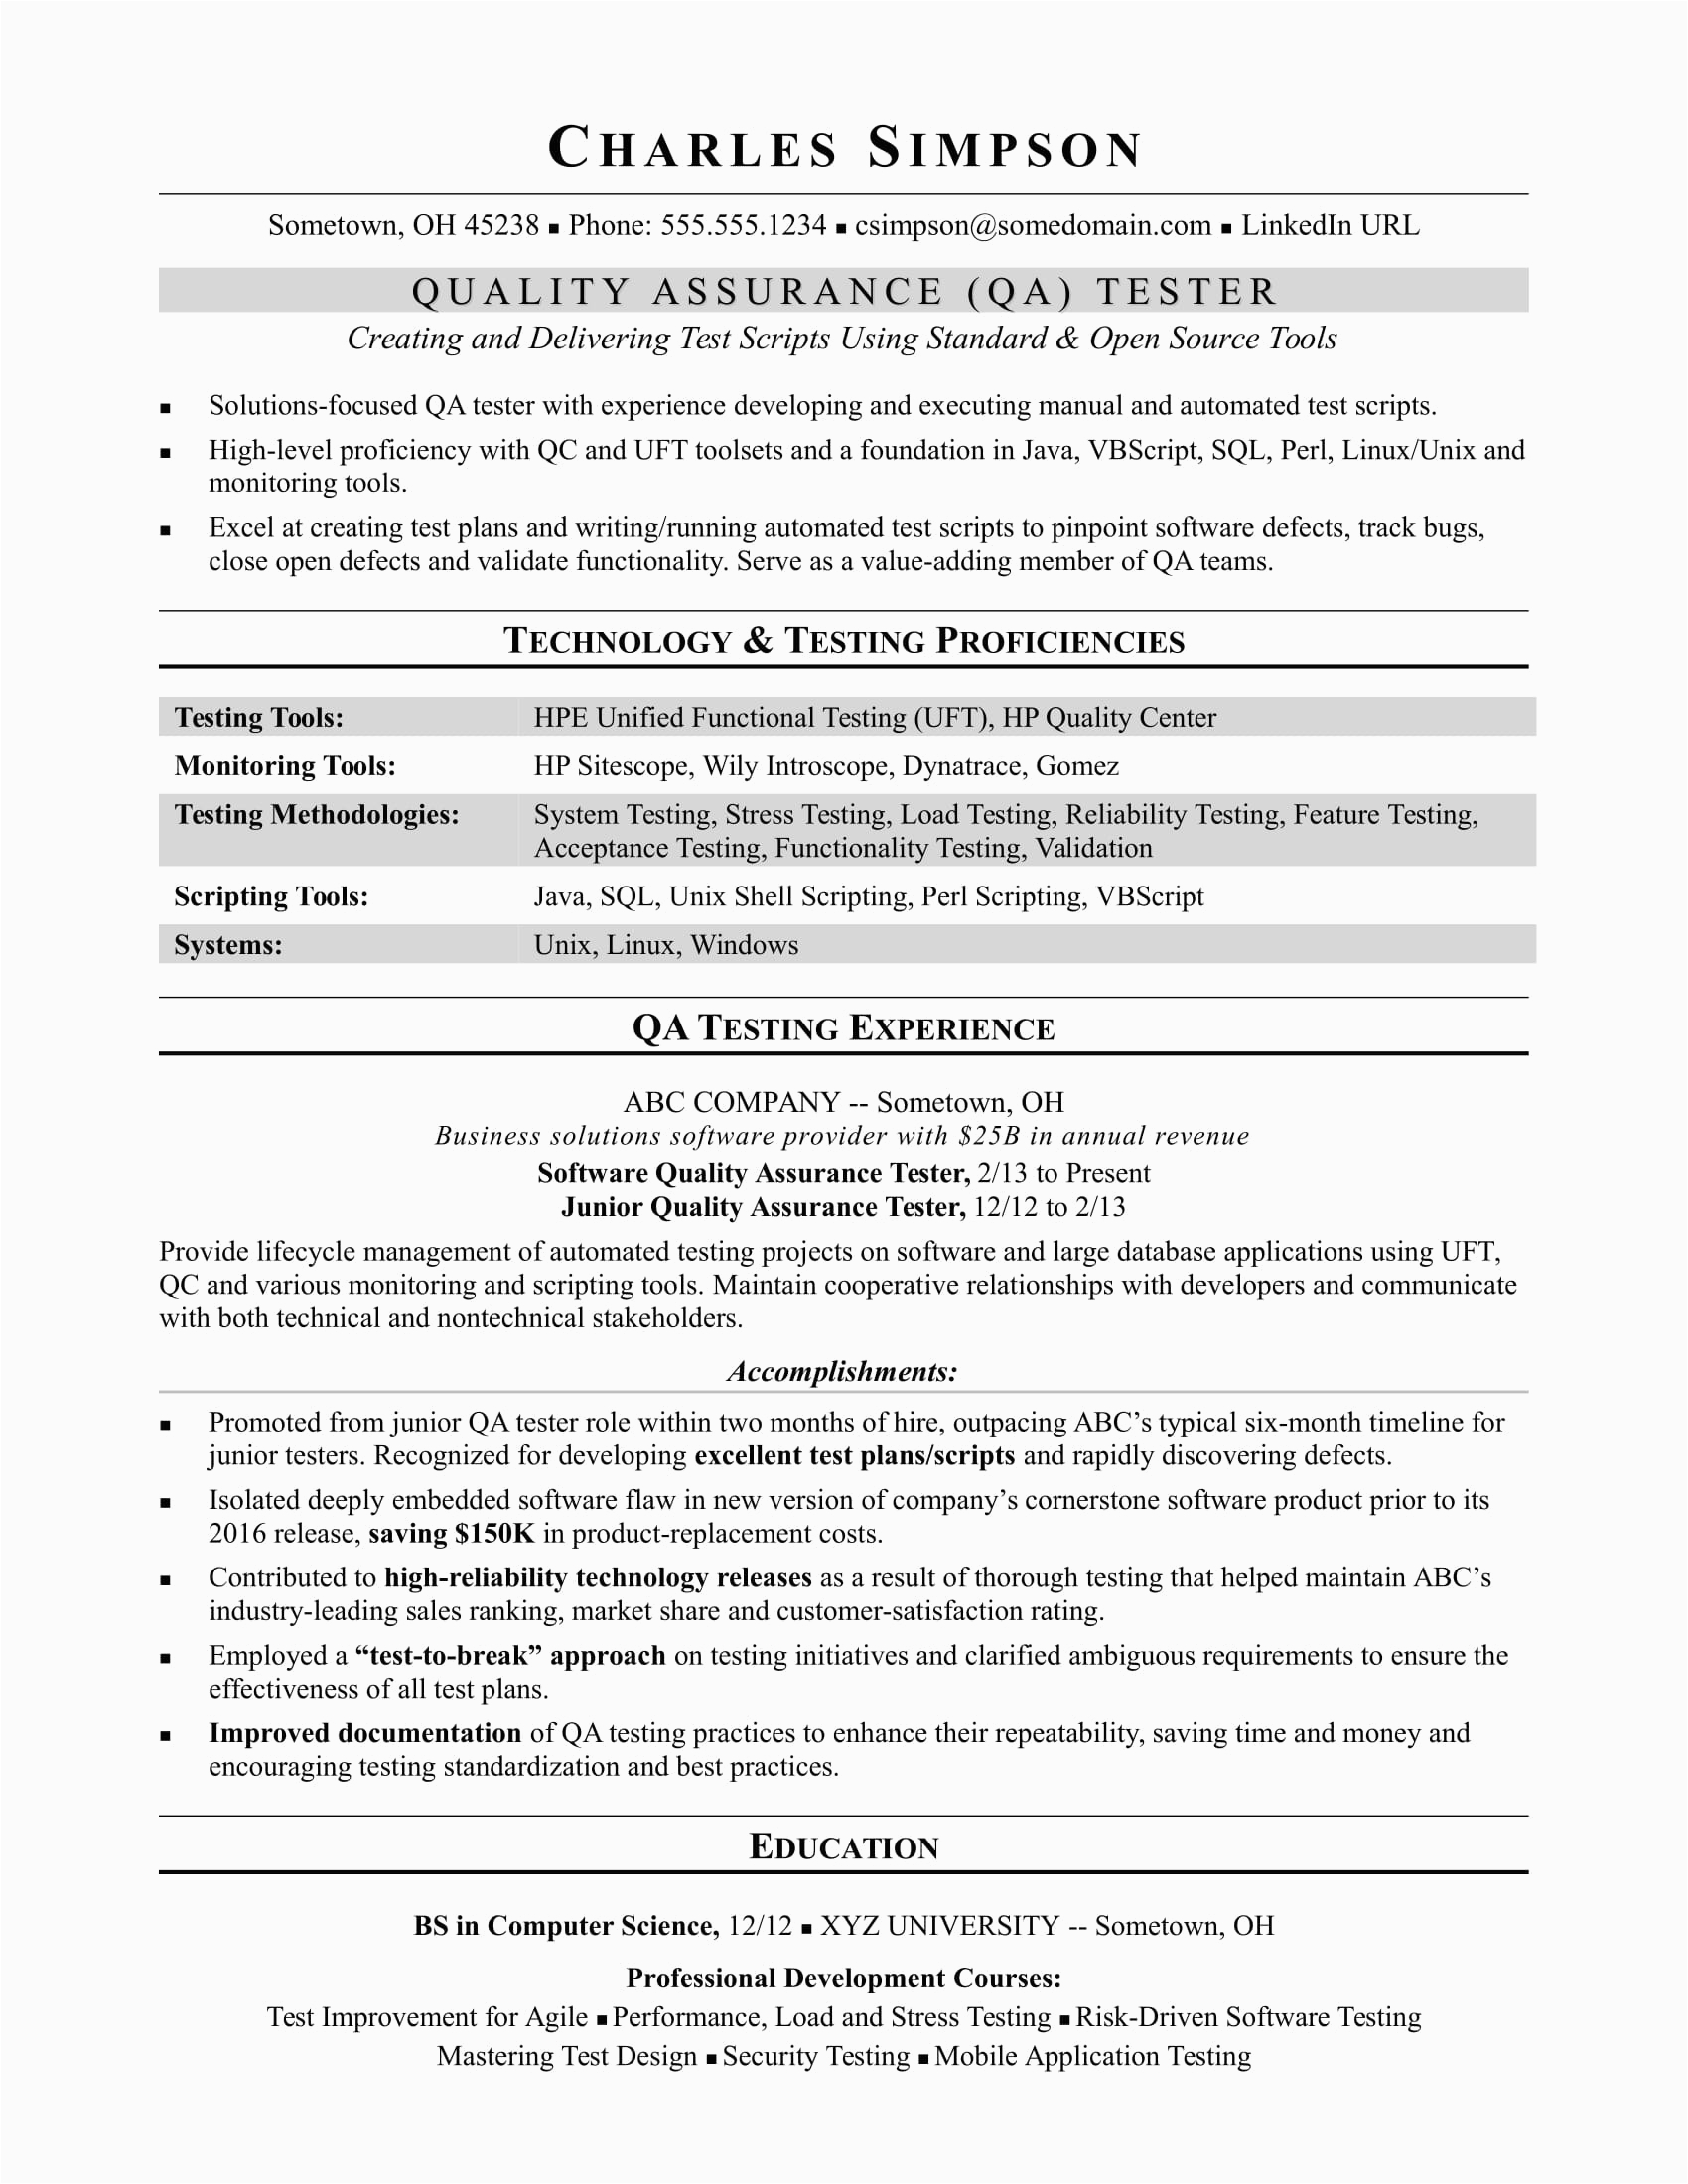 Experienced Resume Samples Of software Tester Resume Qa Tester